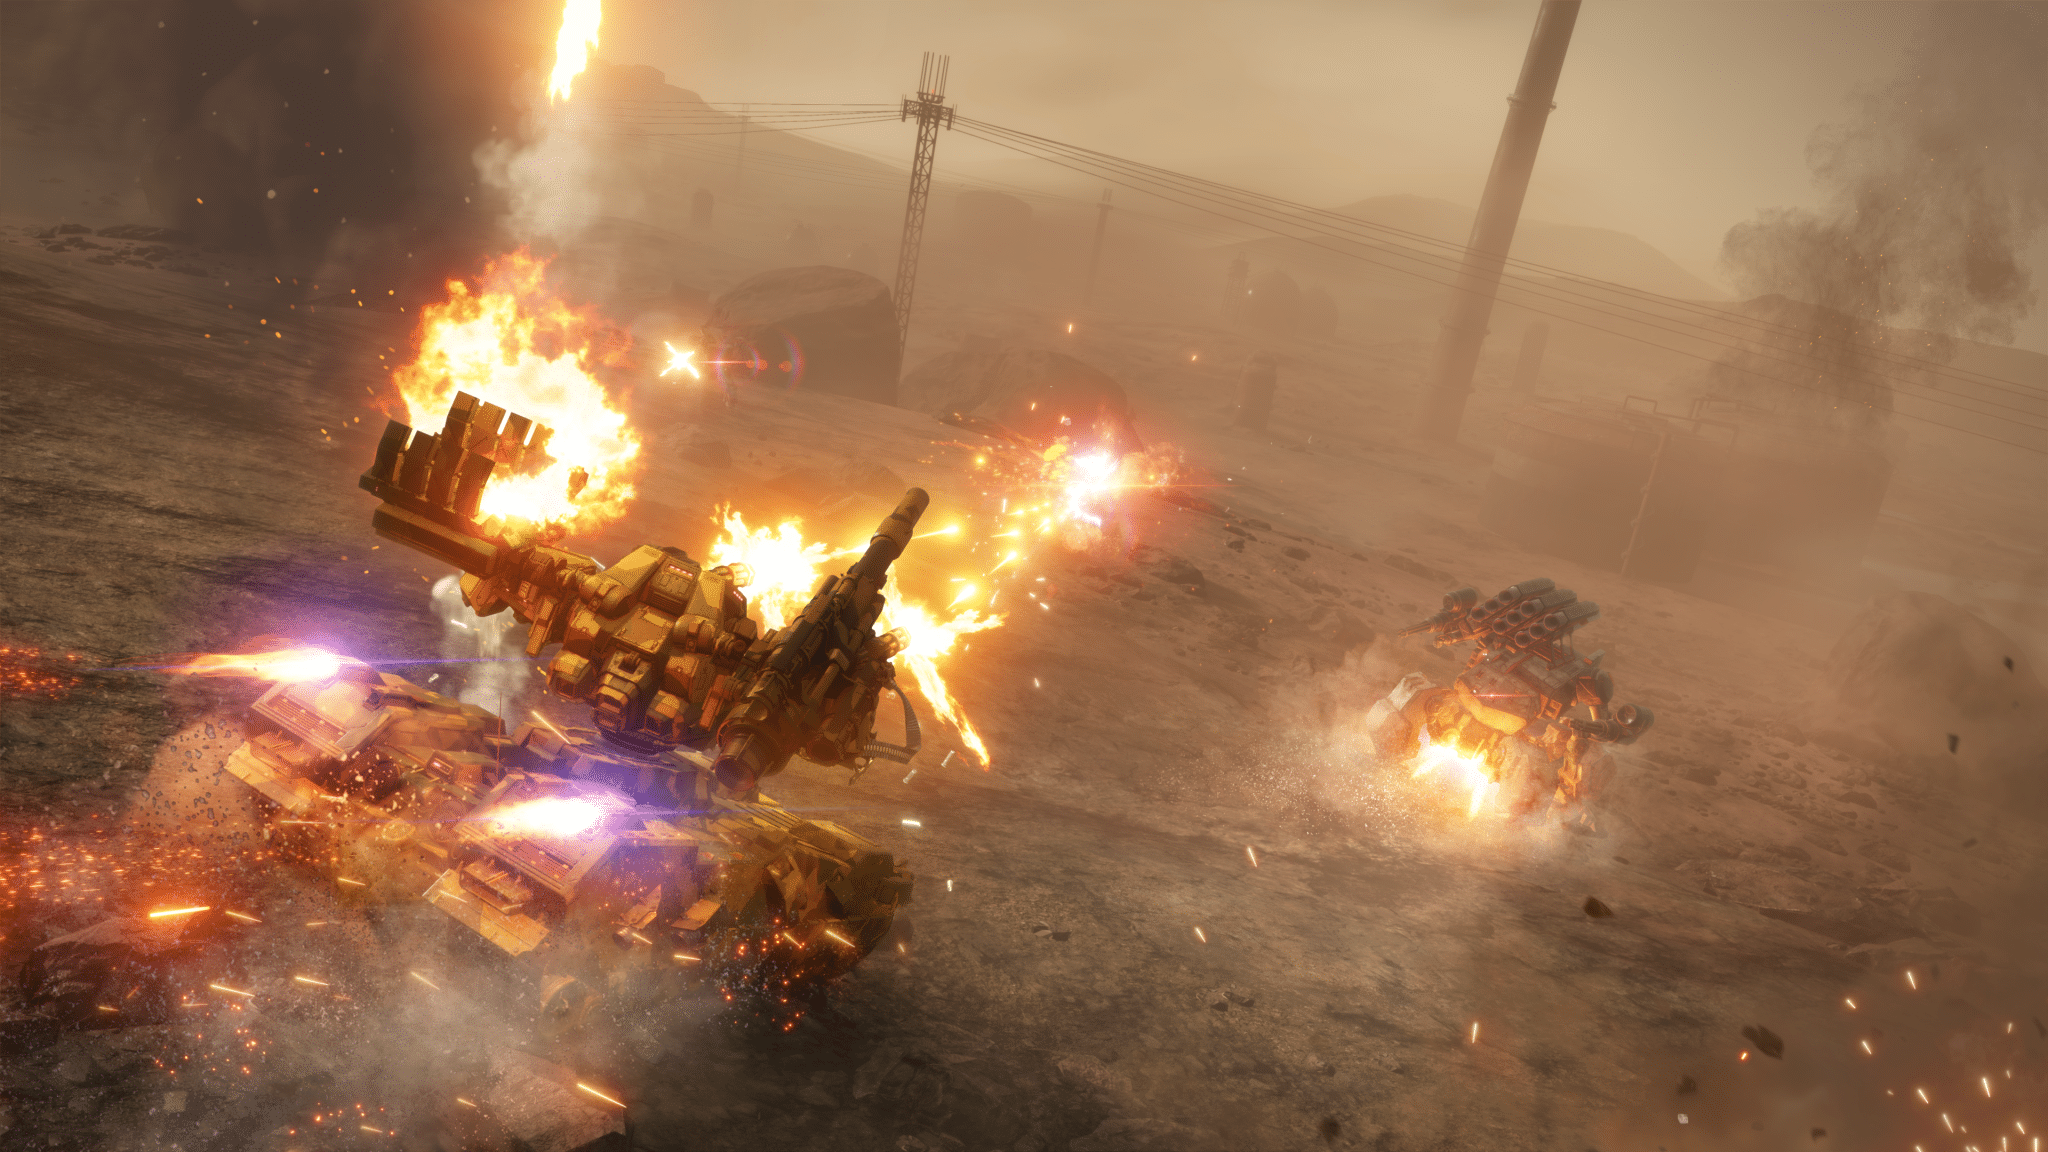 Armored Core 6 gameplay trailer reveals August release date - Xfire